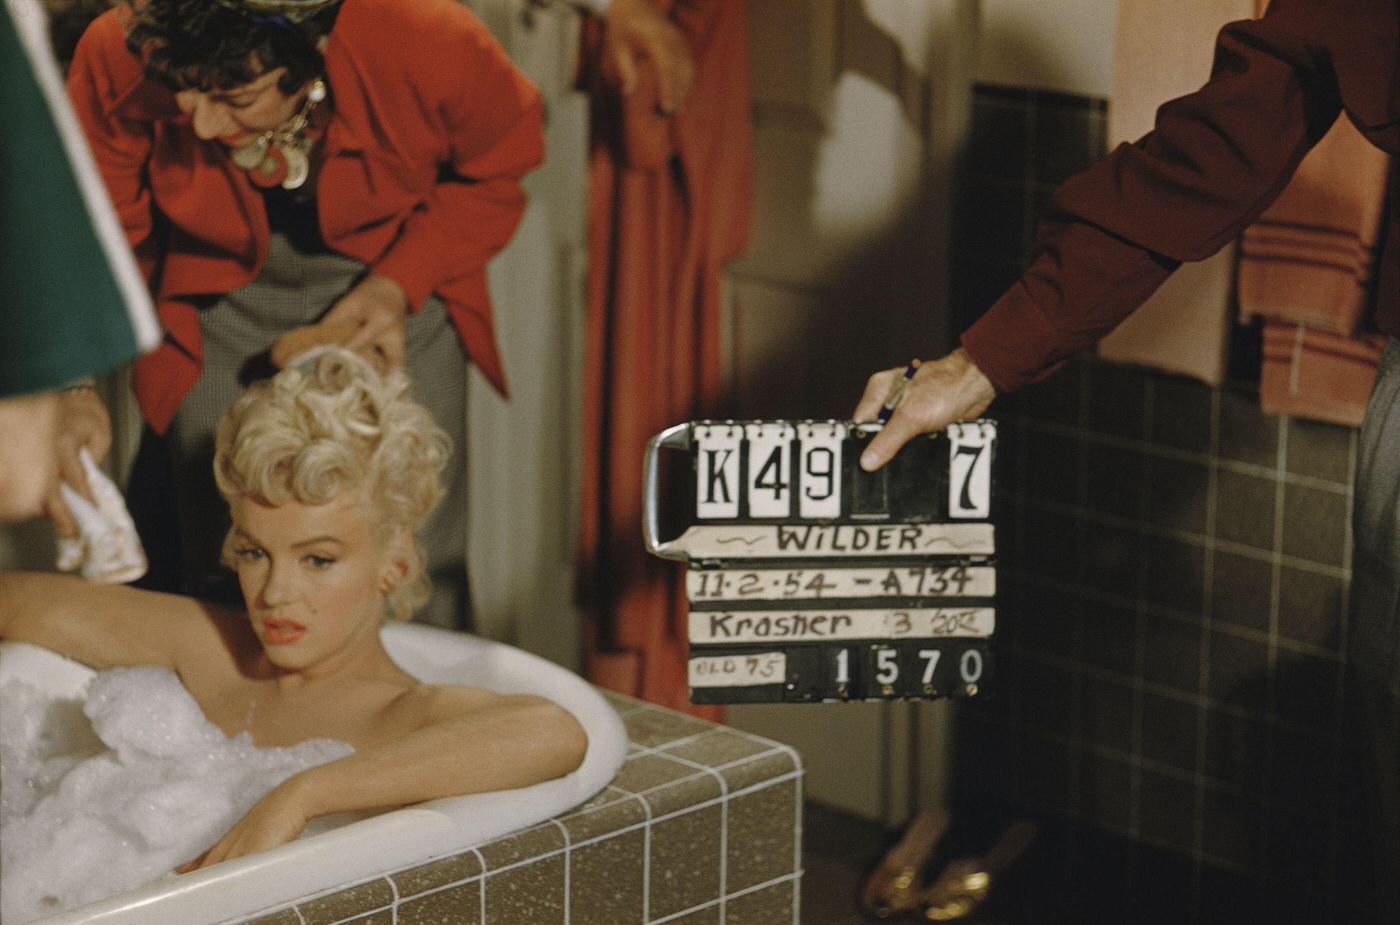 Marilyn Monroe sits in a bubble bath in 1954 during the filming of "The Seven Year Itch"